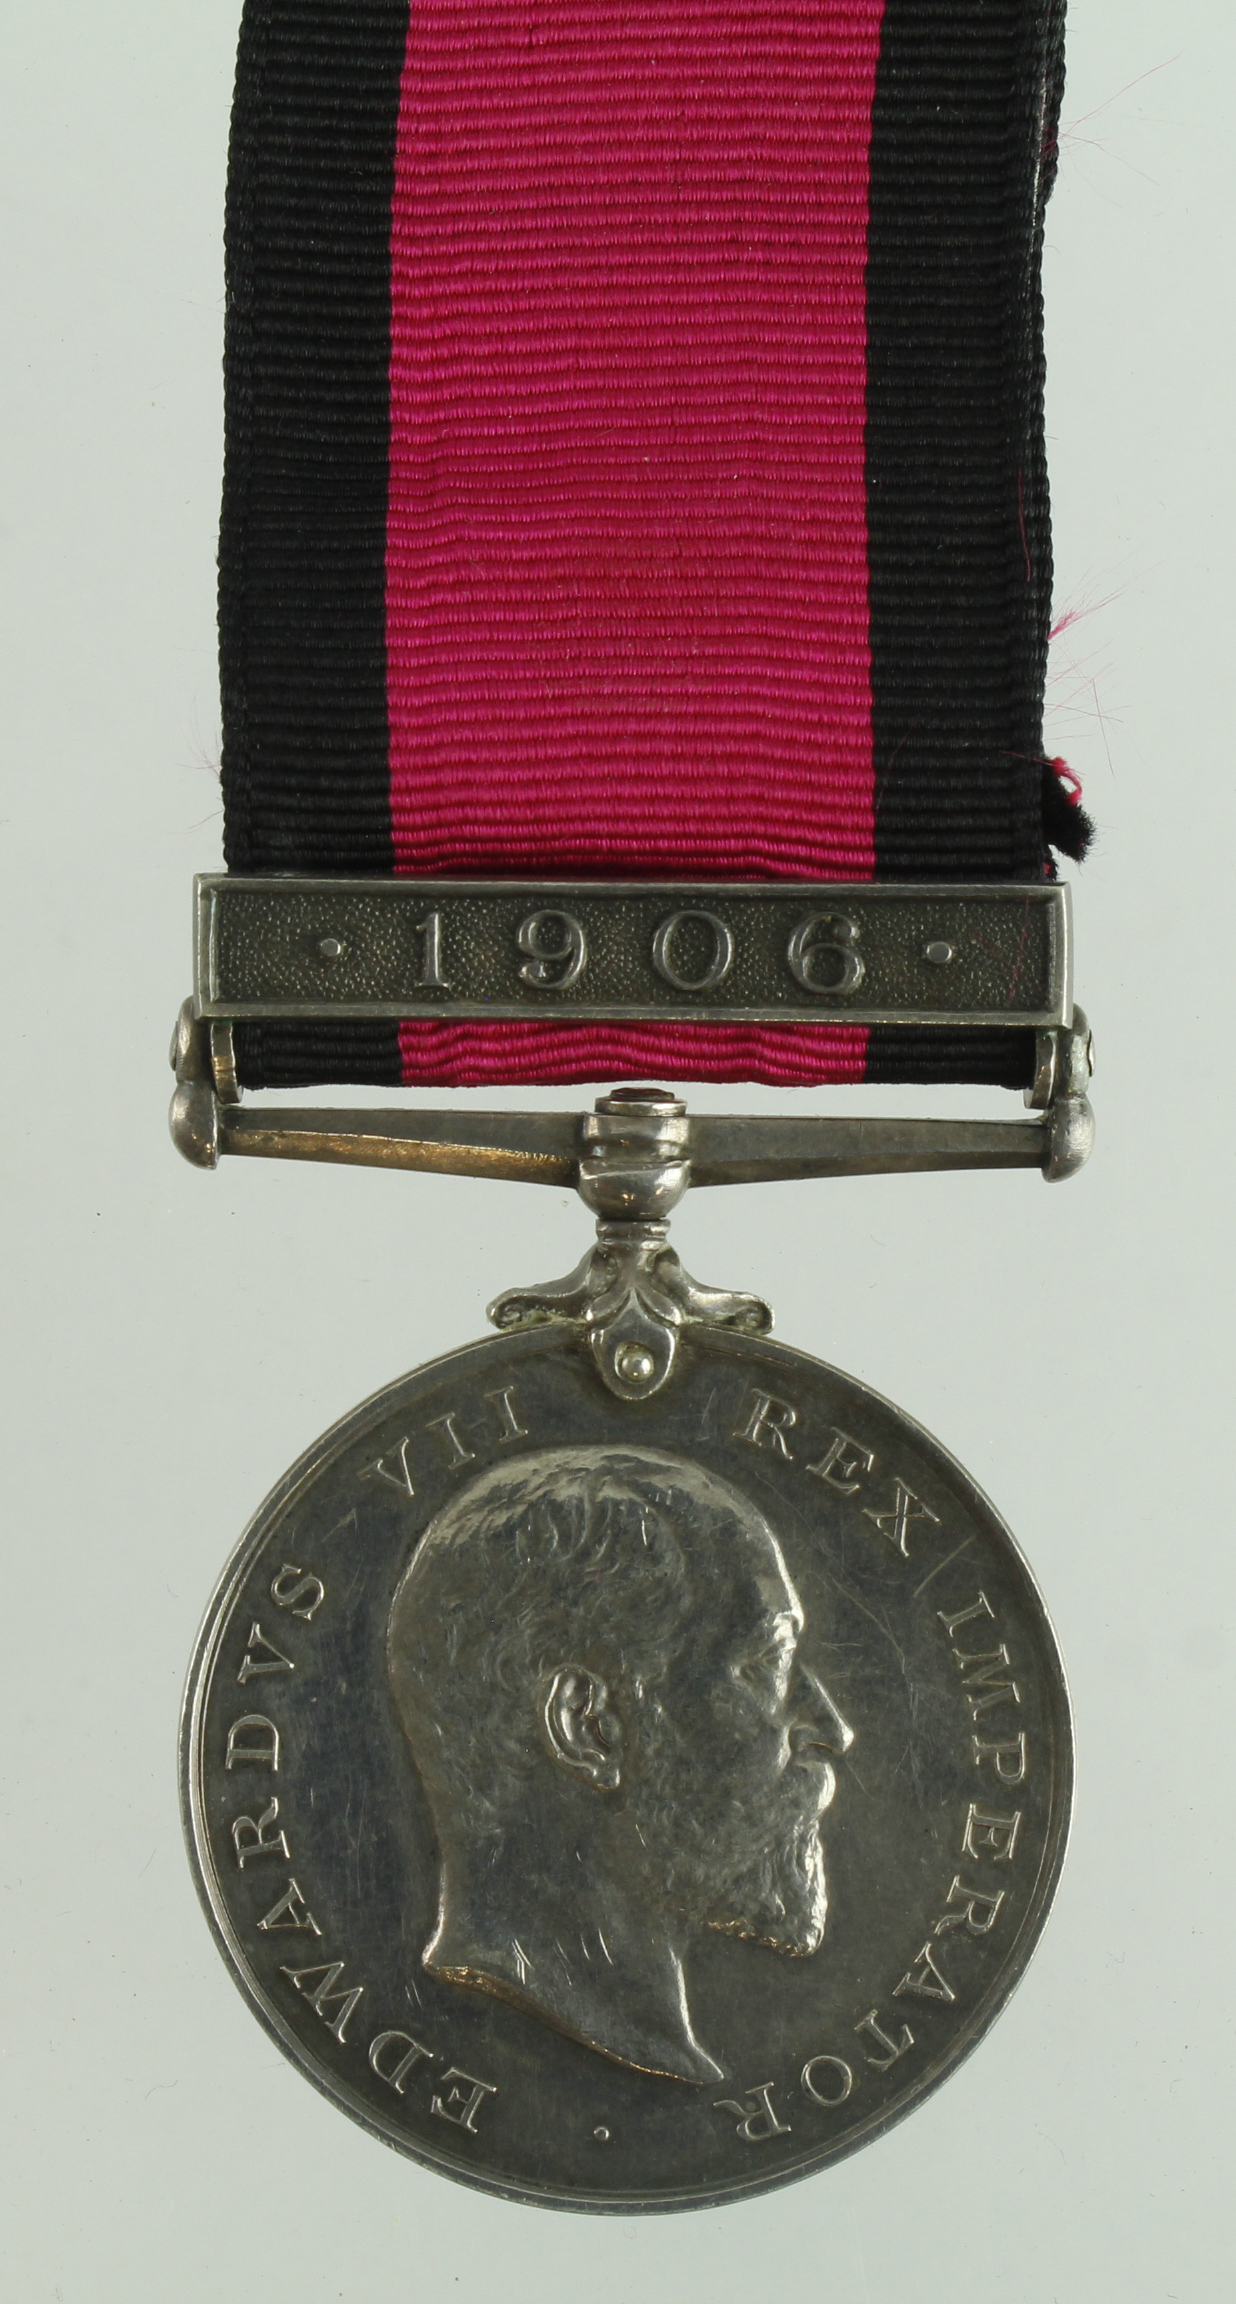 Natal Rebellion Medal with 1906 clasp (Tpr F Reilly Lancs & Yorks Contg) surname corrected